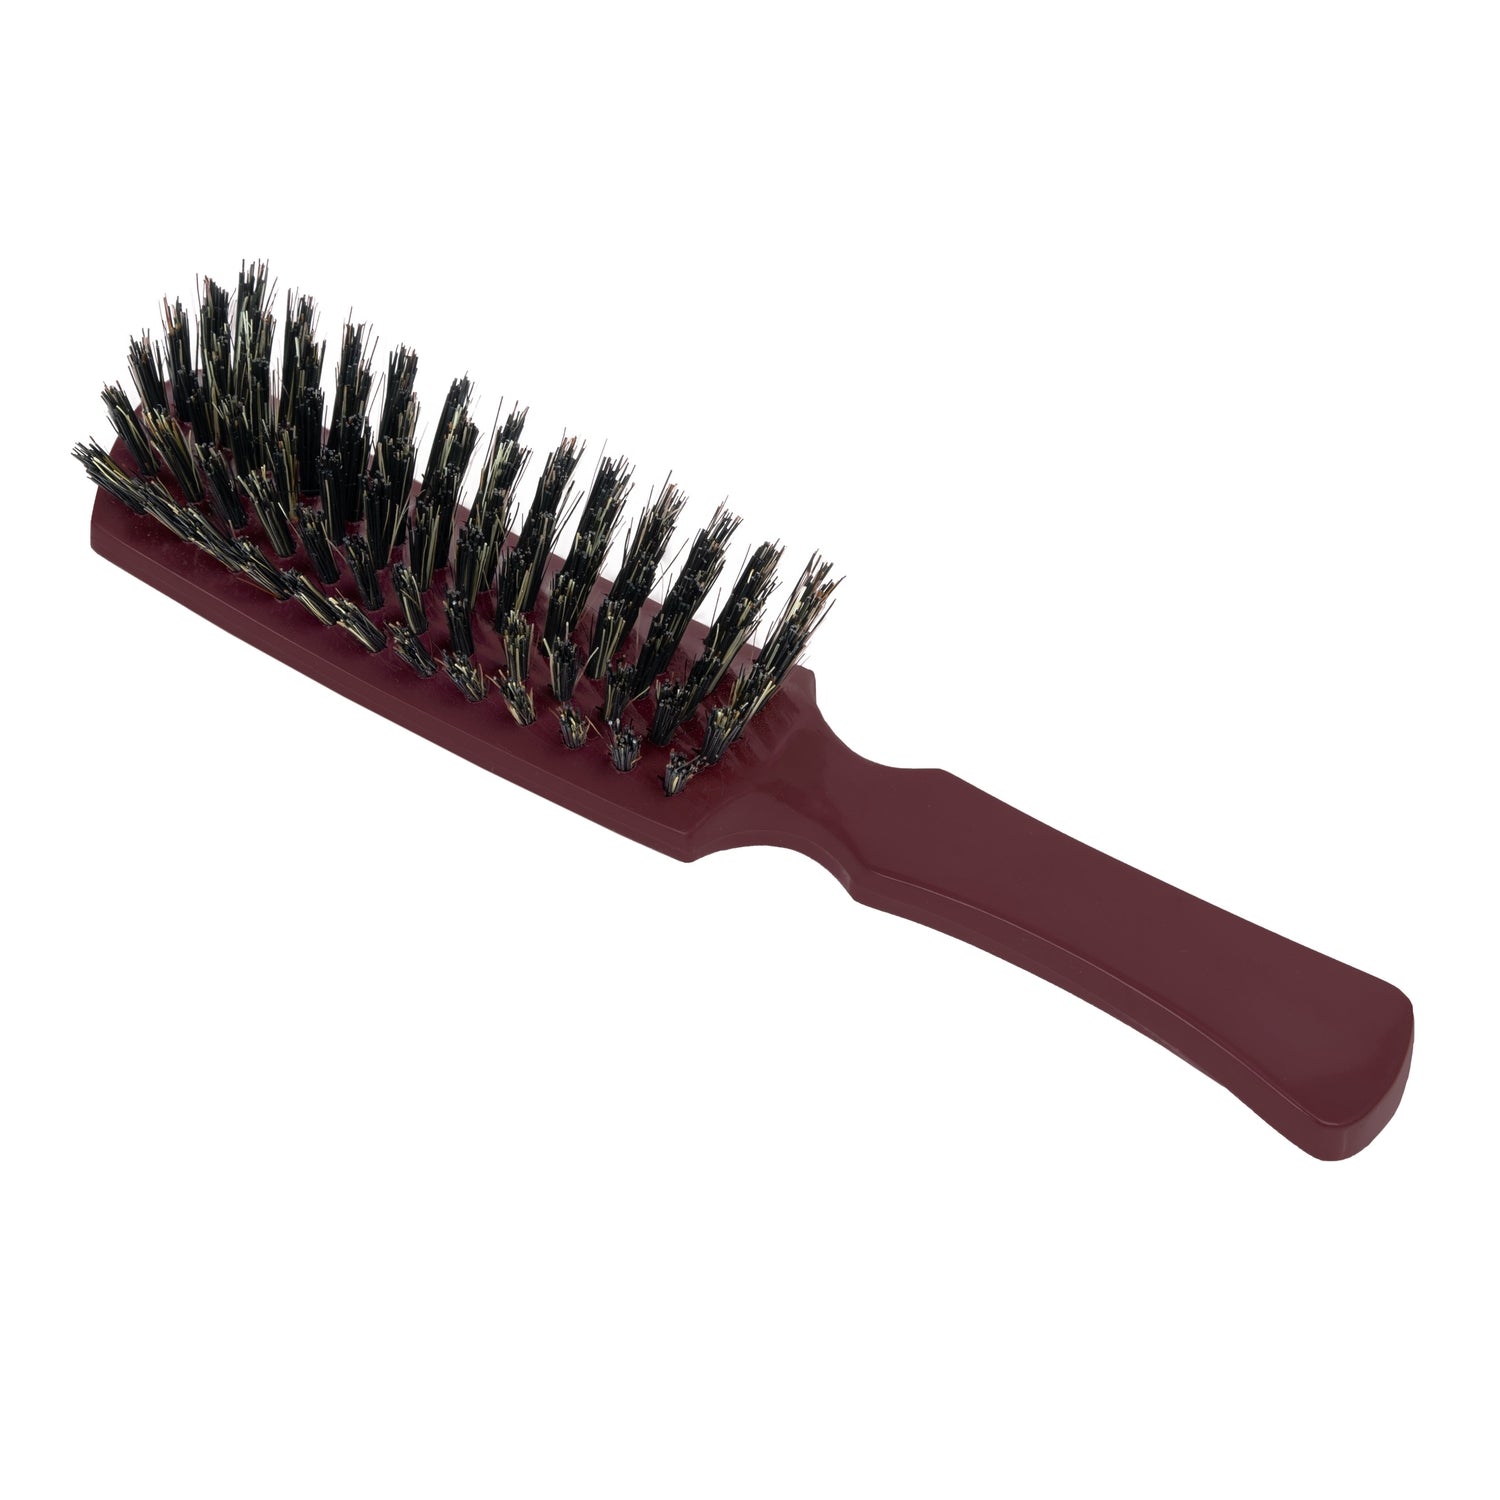 https://fuller.com/cdn/shop/products/nylon-and-boar-bristle-professional-styling-hairbrush-for-all-hair-types-mulberry-color-hair-brushes_1500x1500.jpg?v=1596017221